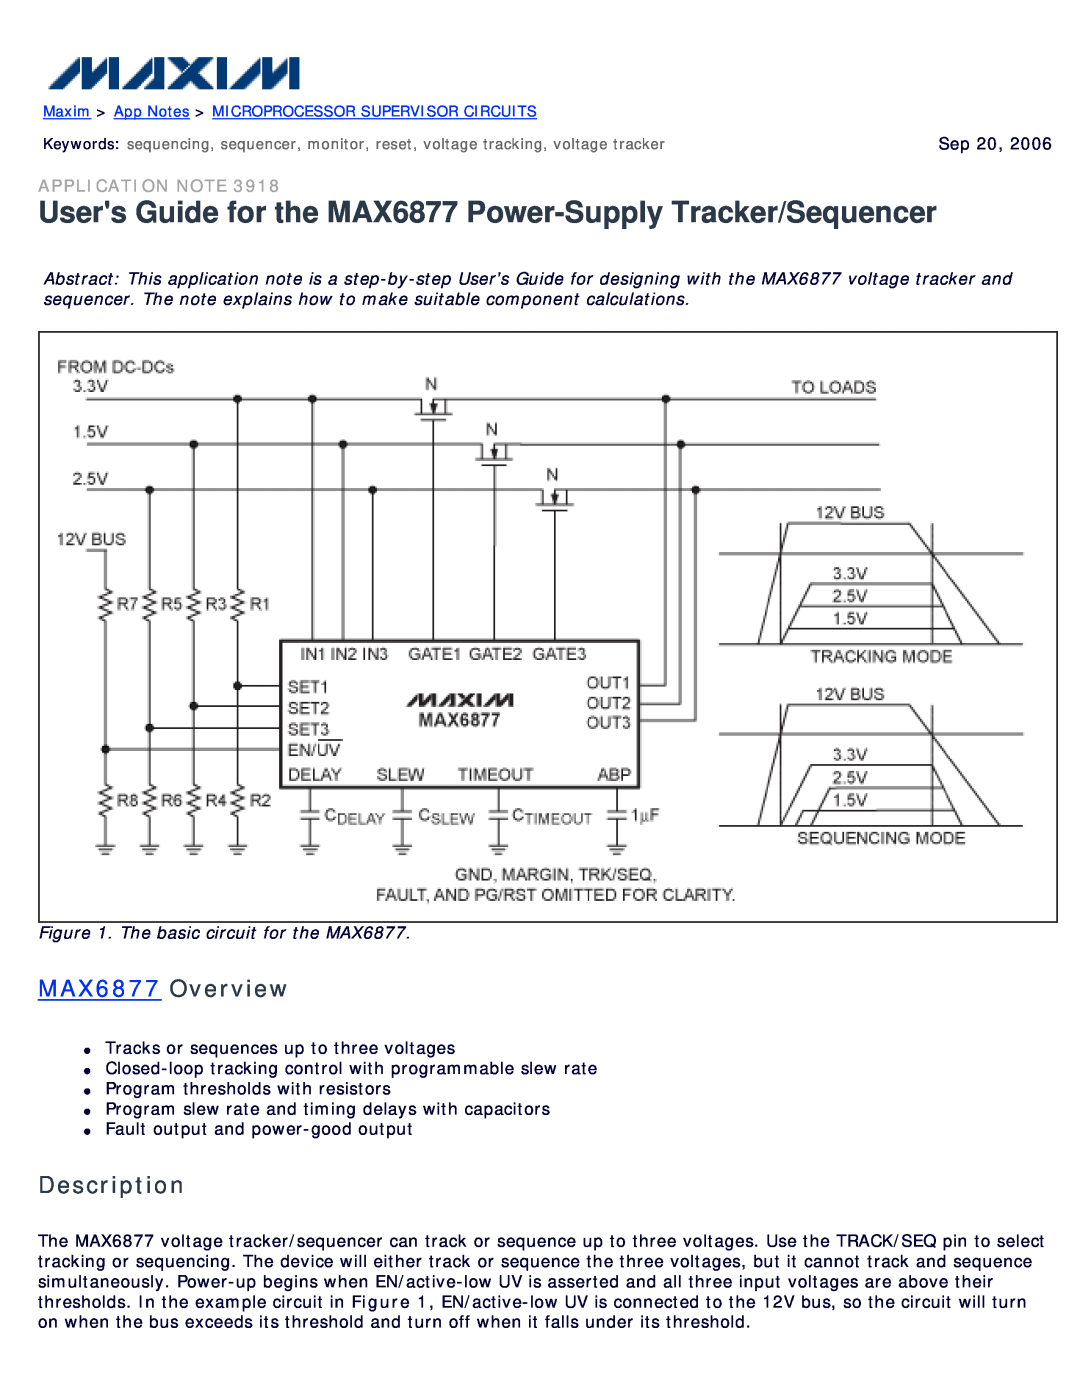 Maxim manual Users Guide for the MAX6877 Power-Supply Tracker/Sequencer, MAX6877 Overview, Description 